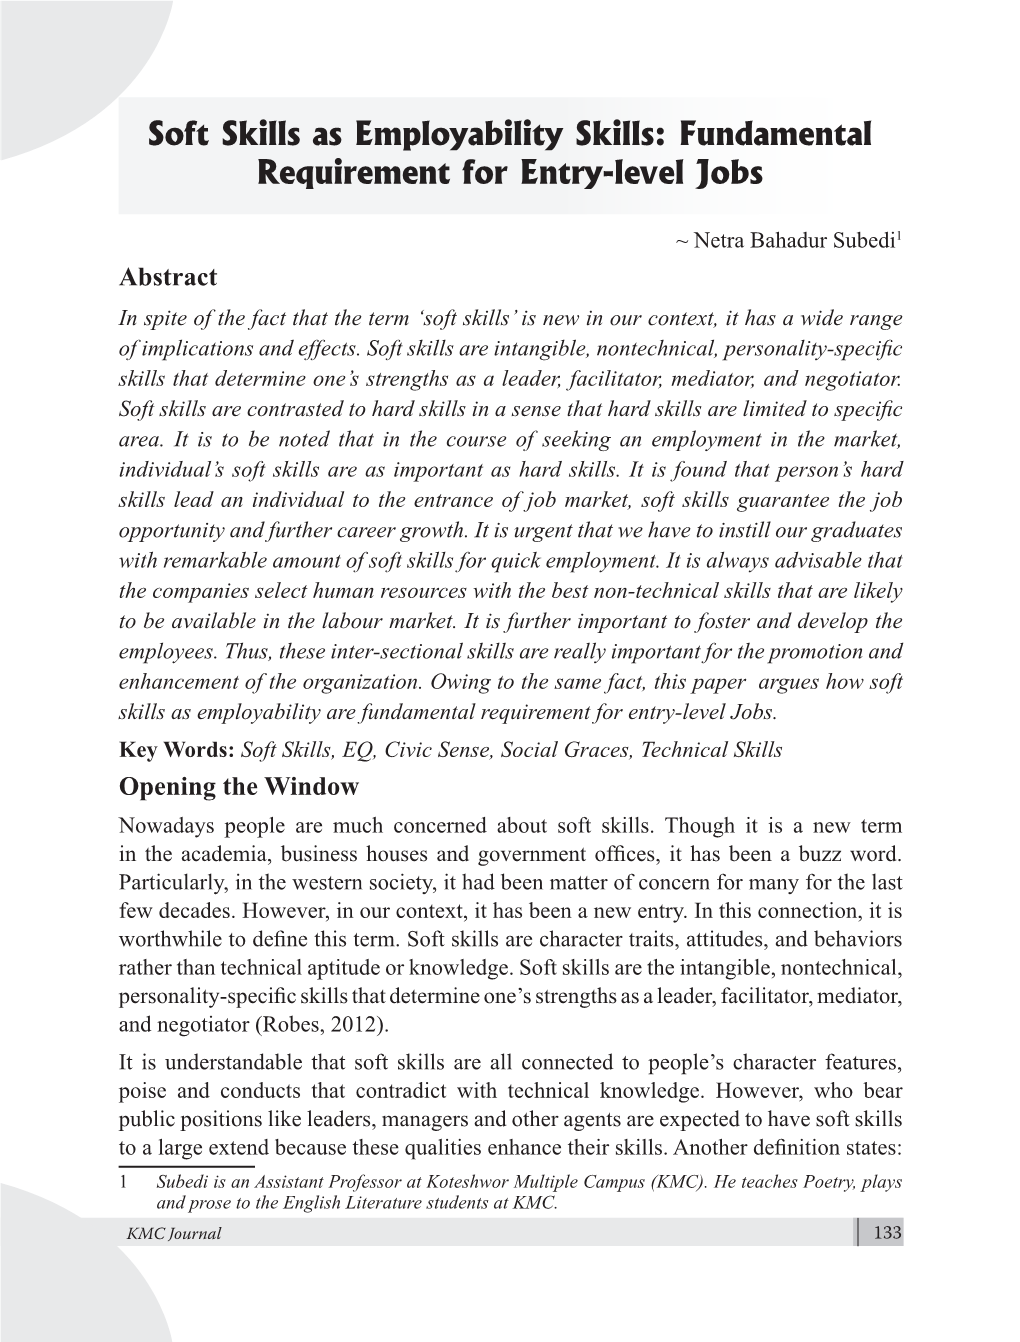 Soft Skills As Employability Skills: Fundamental Requirement for Entry-Level Jobs